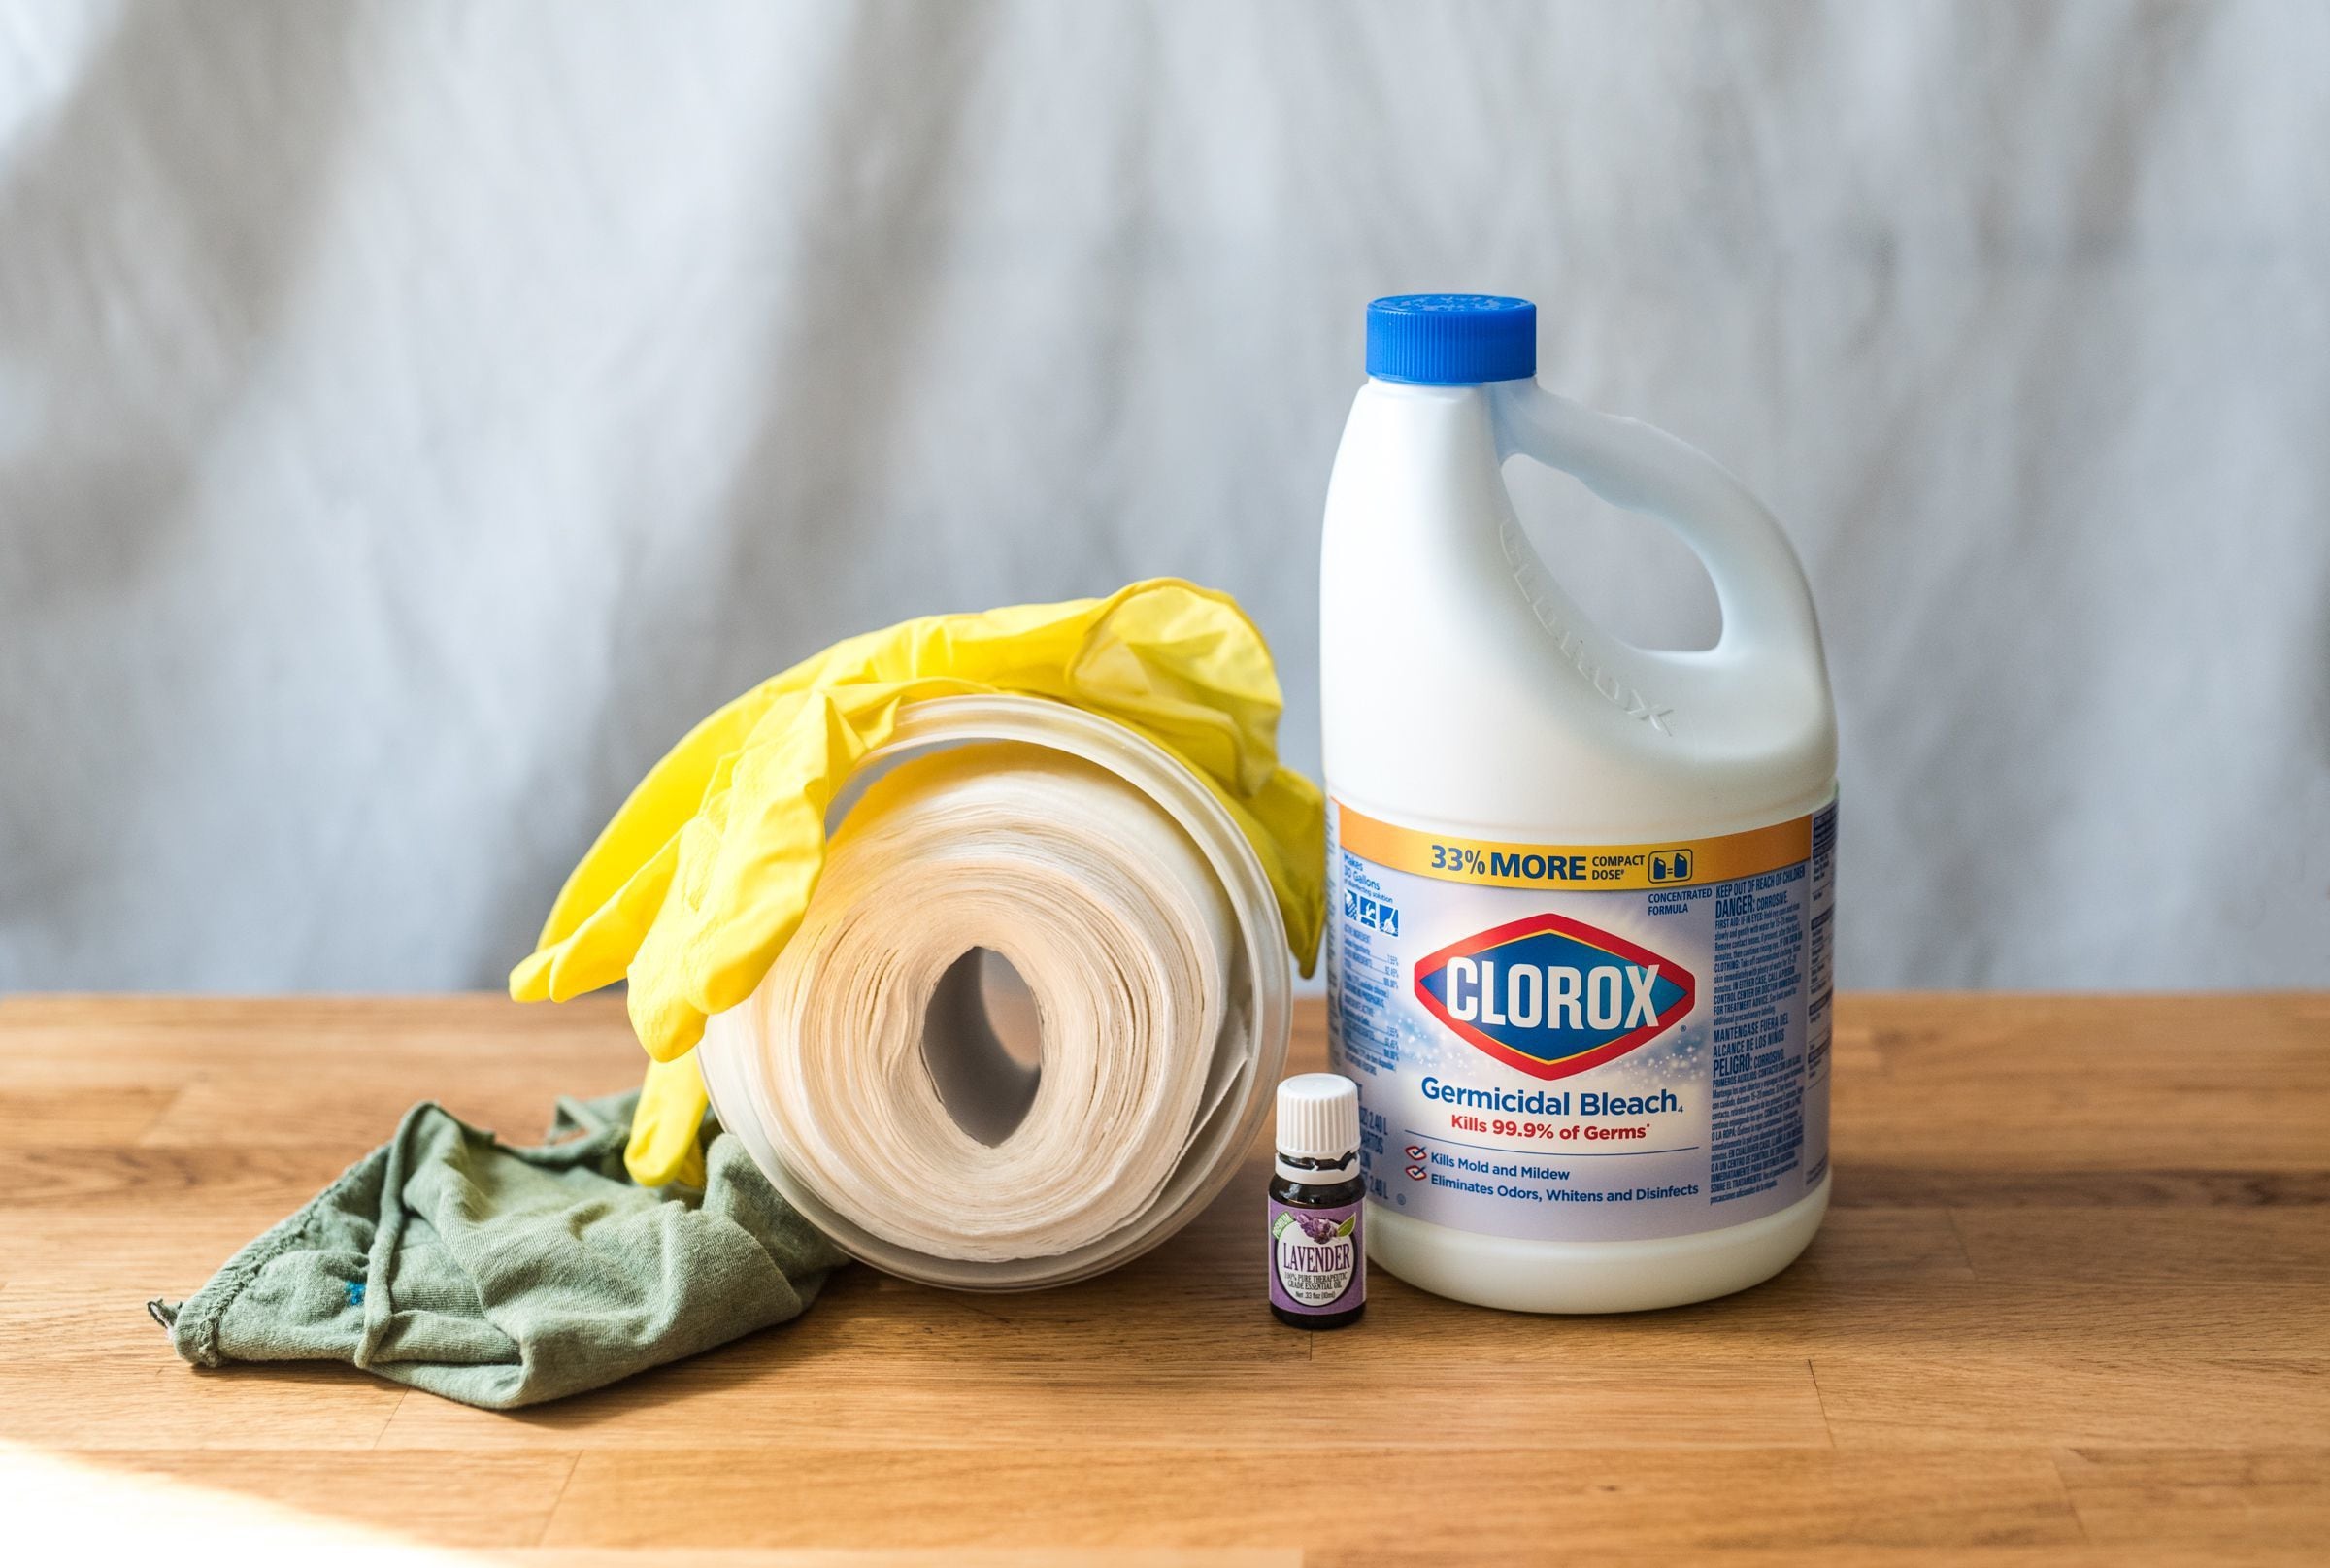 COVID-19: Here's where to buy cleaning wipes